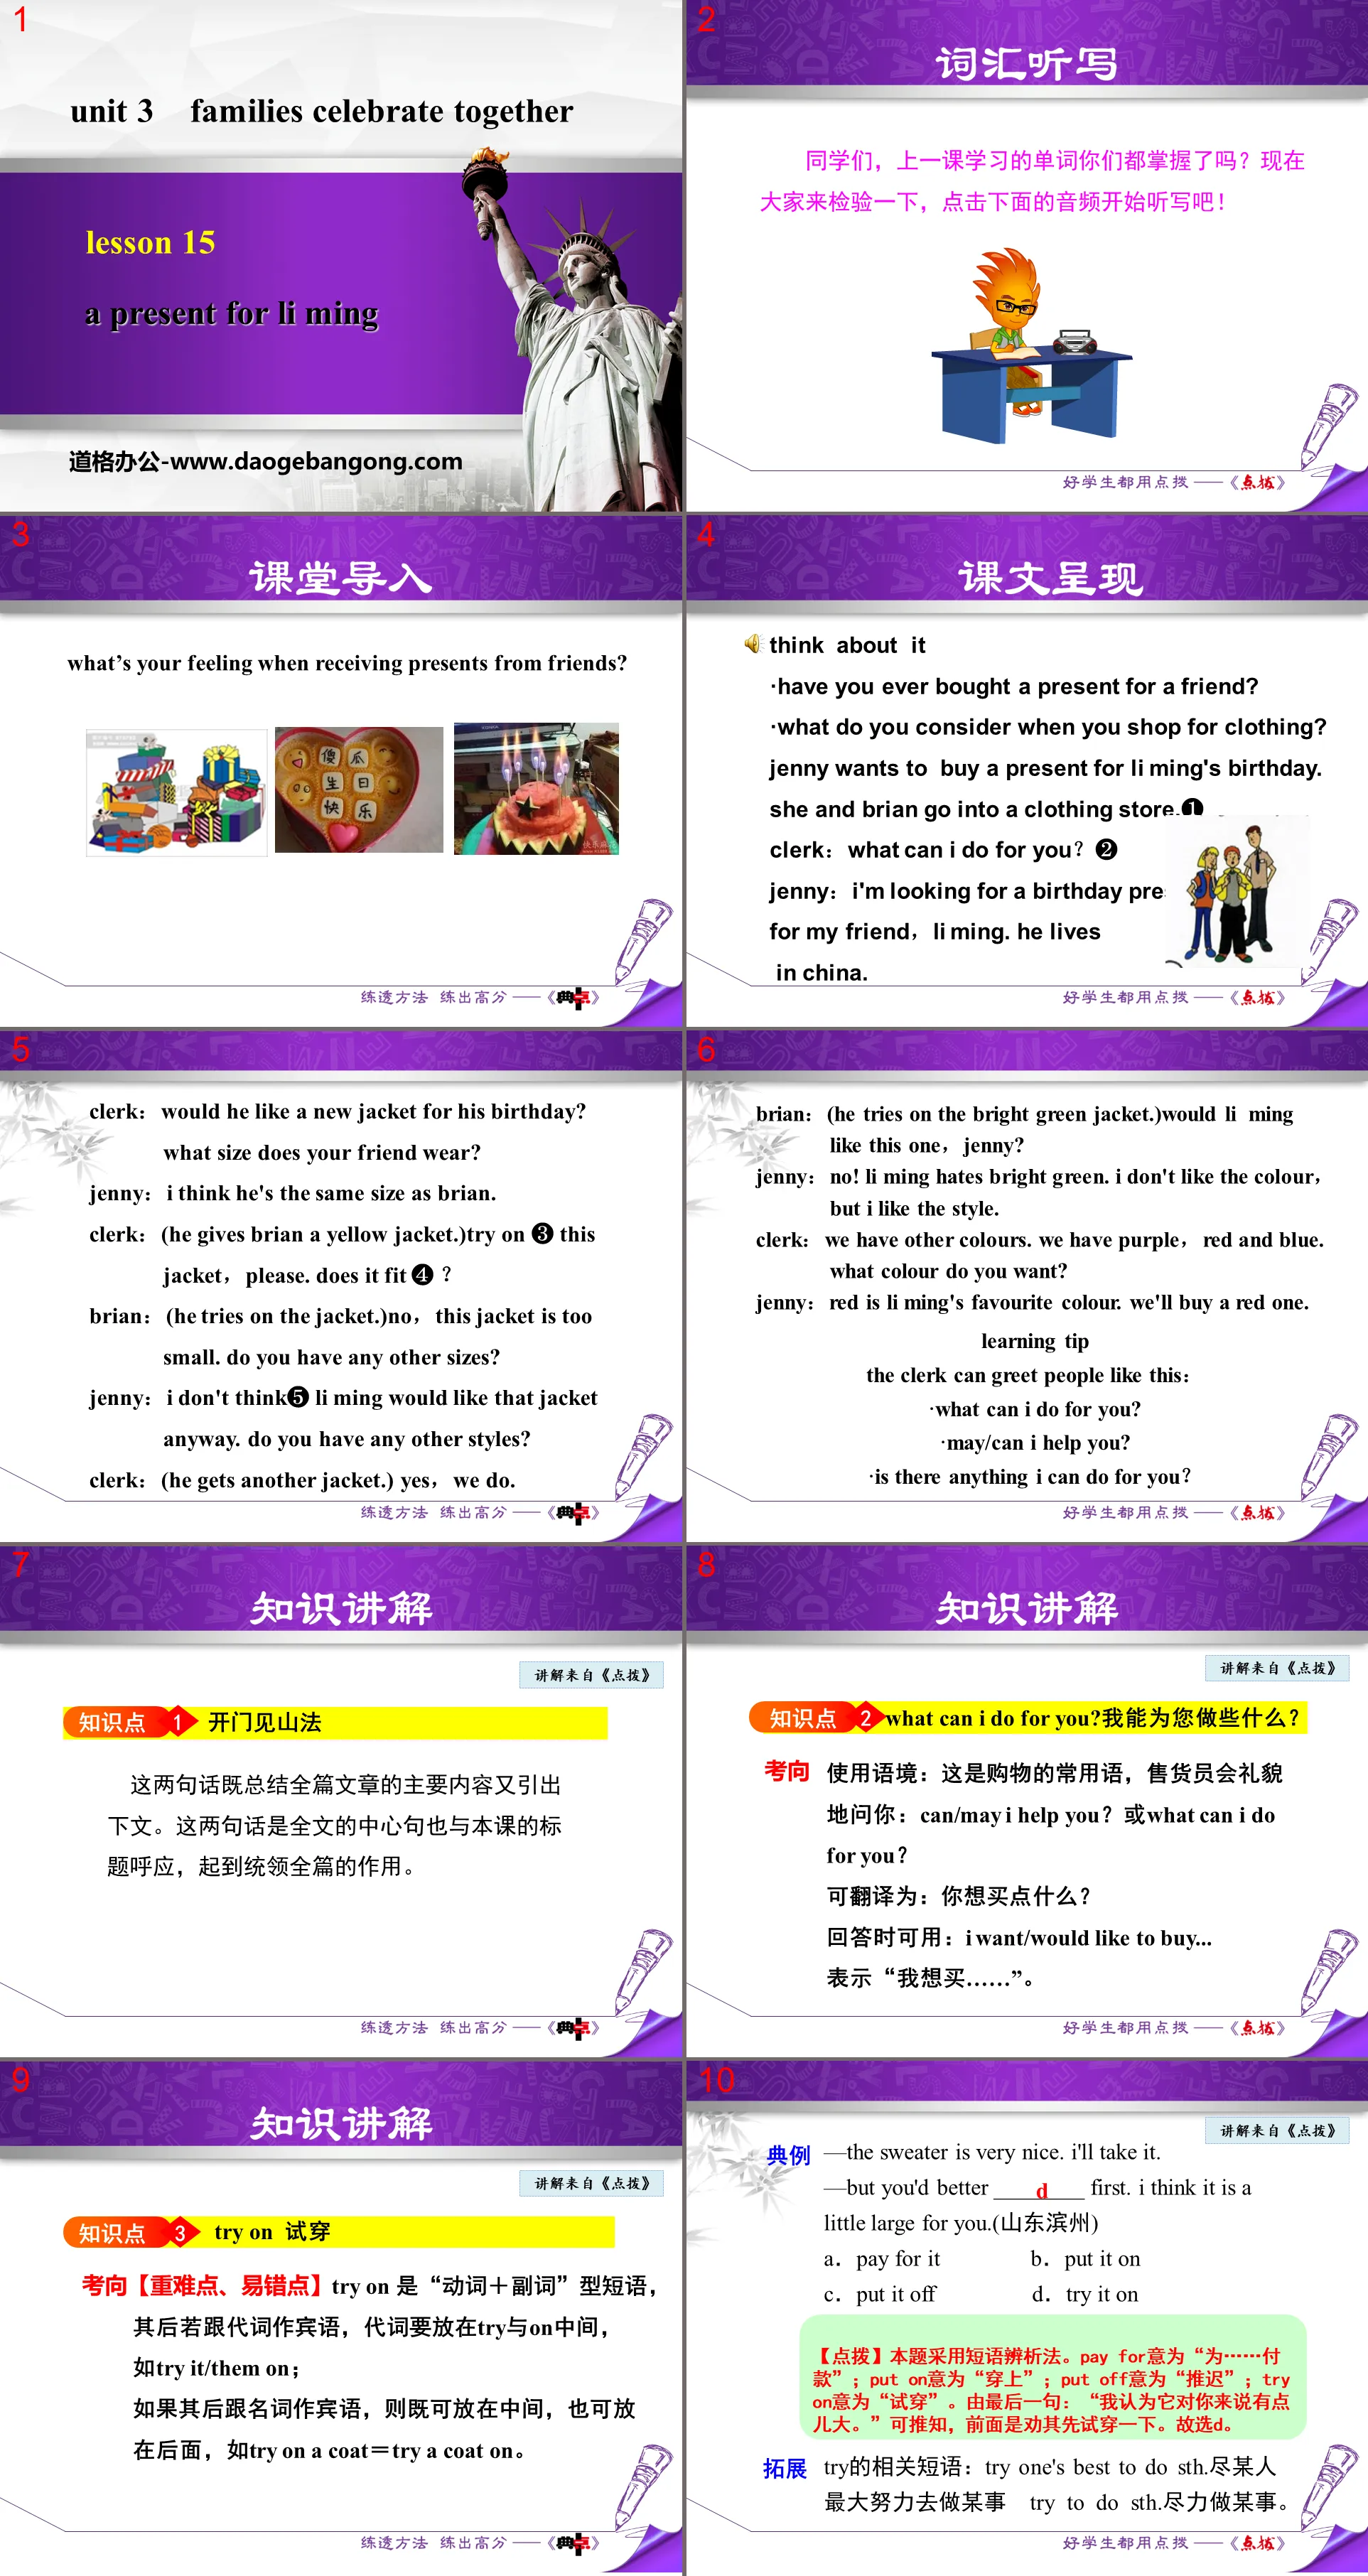 "A Present for Li Ming" Families Celebrate Together PPT free download